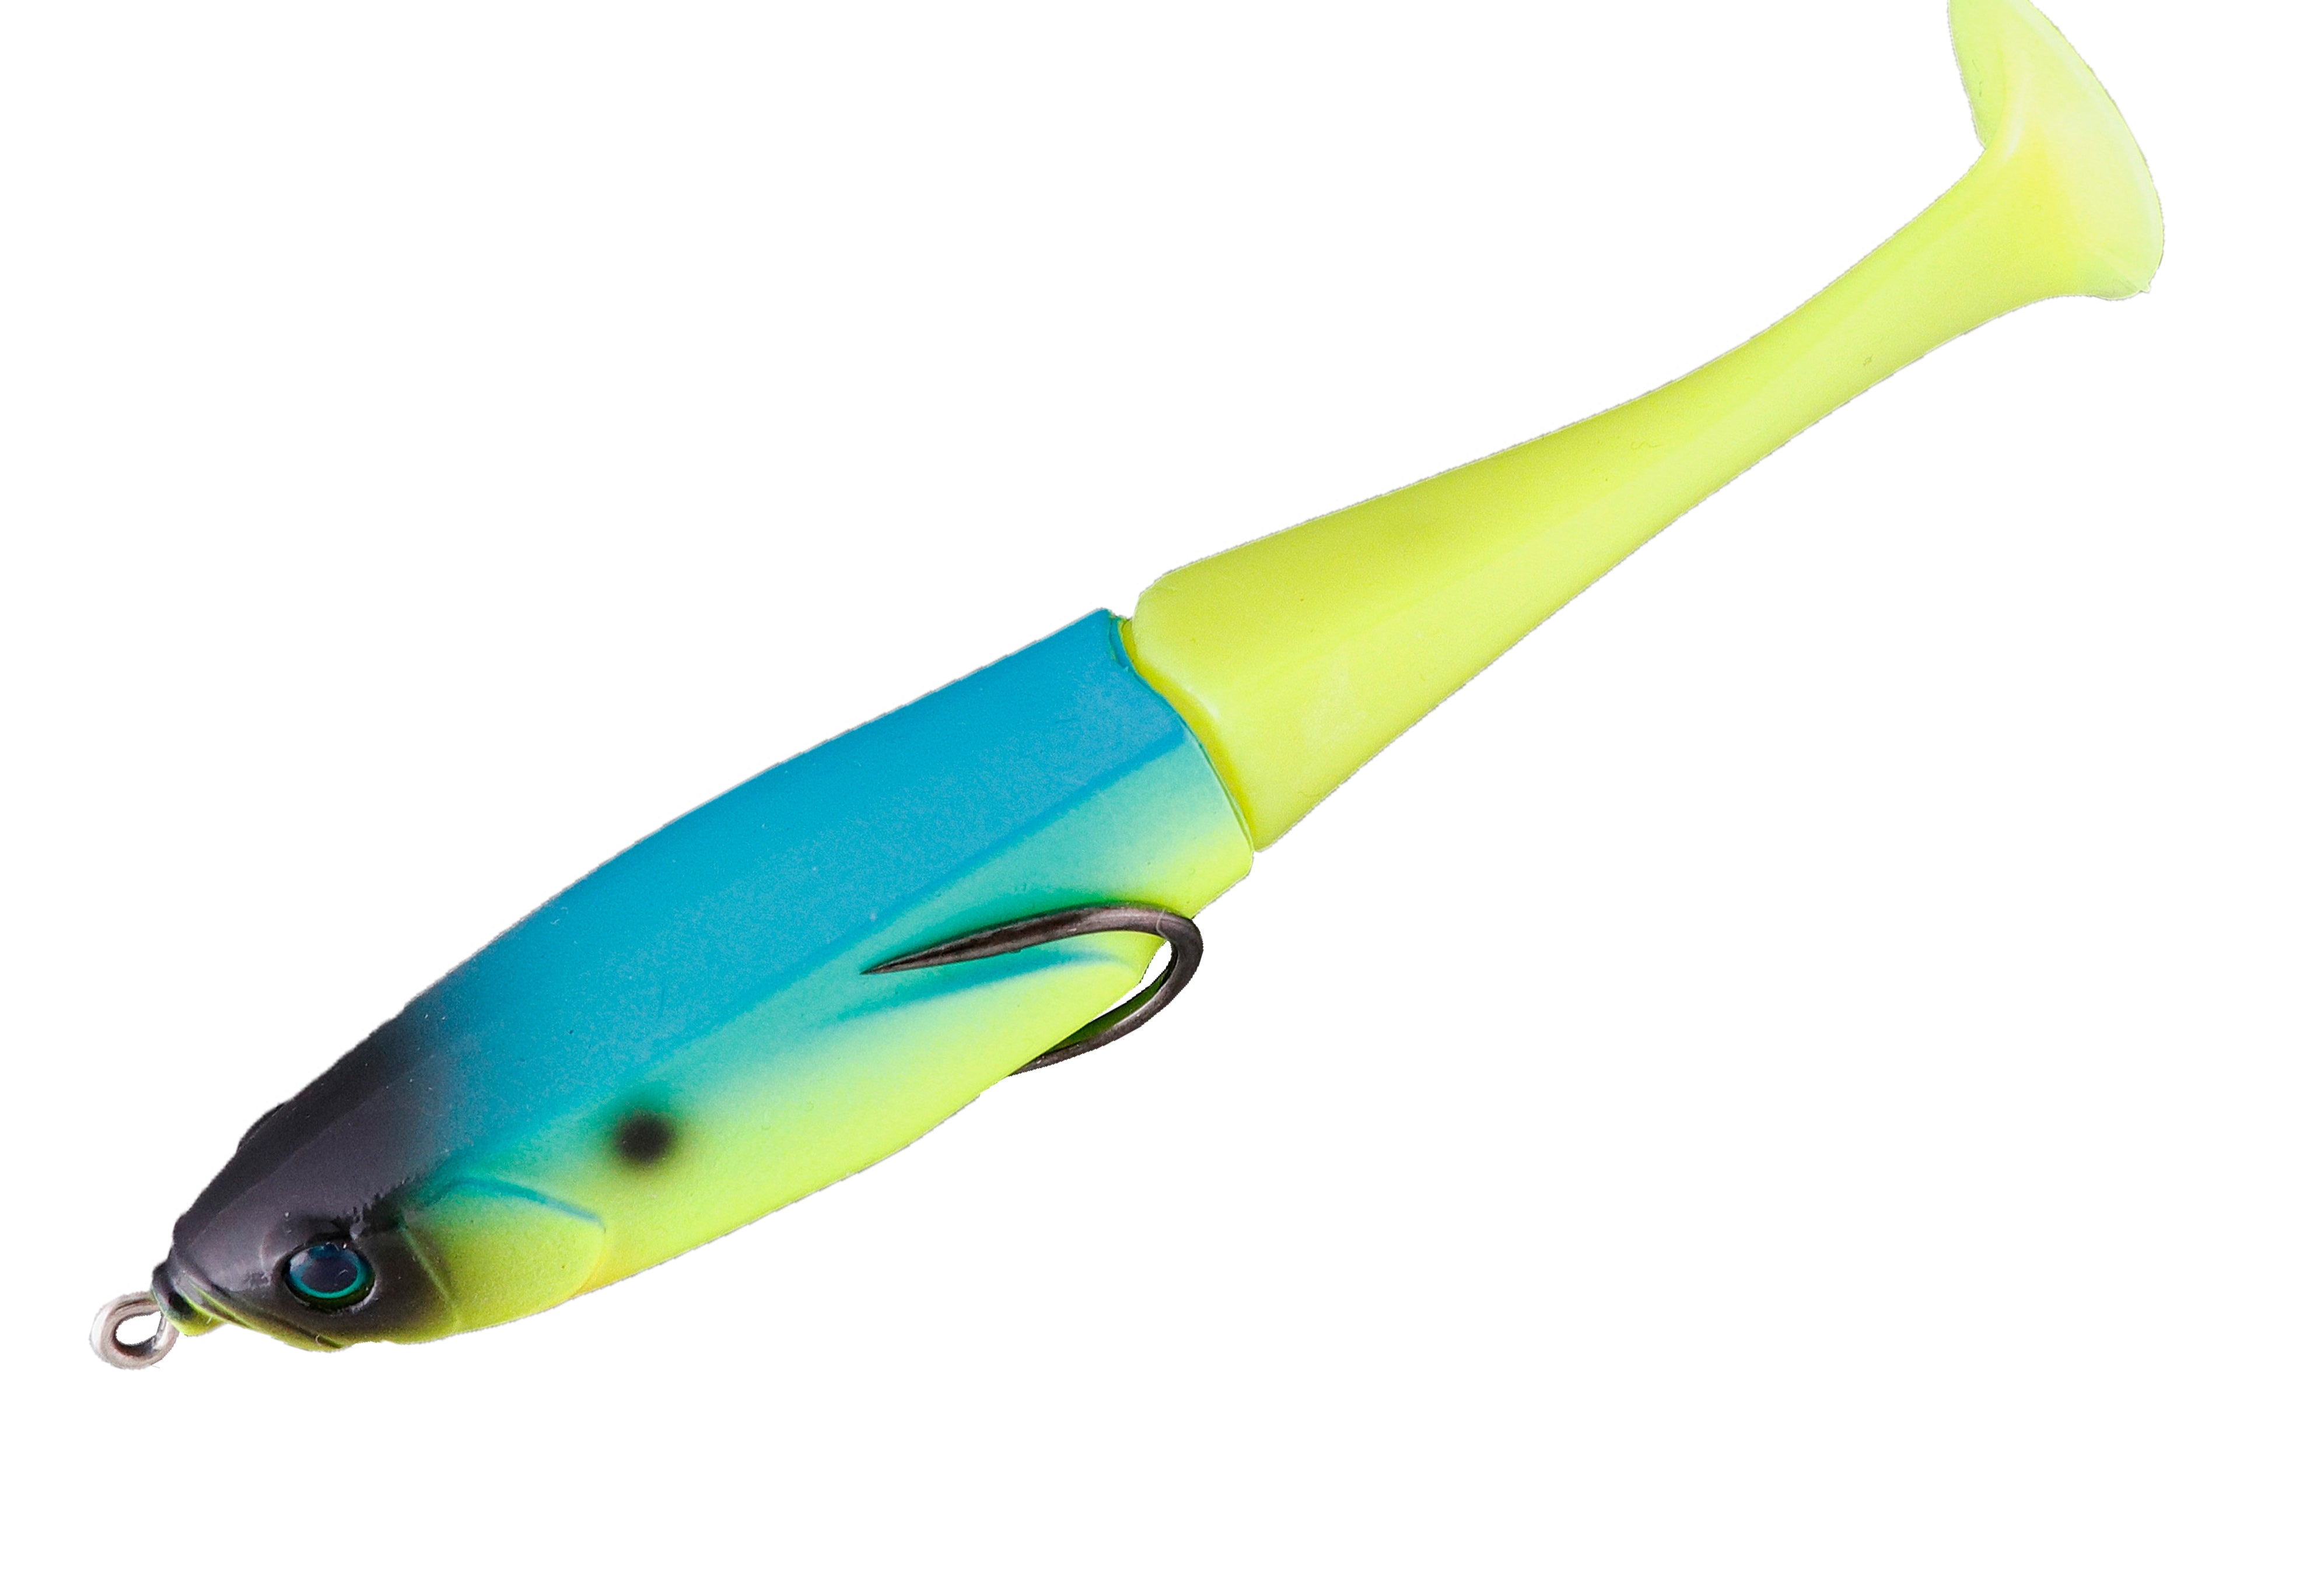 Jackall Grinch Hollow Body Paddle Tail Swimbait